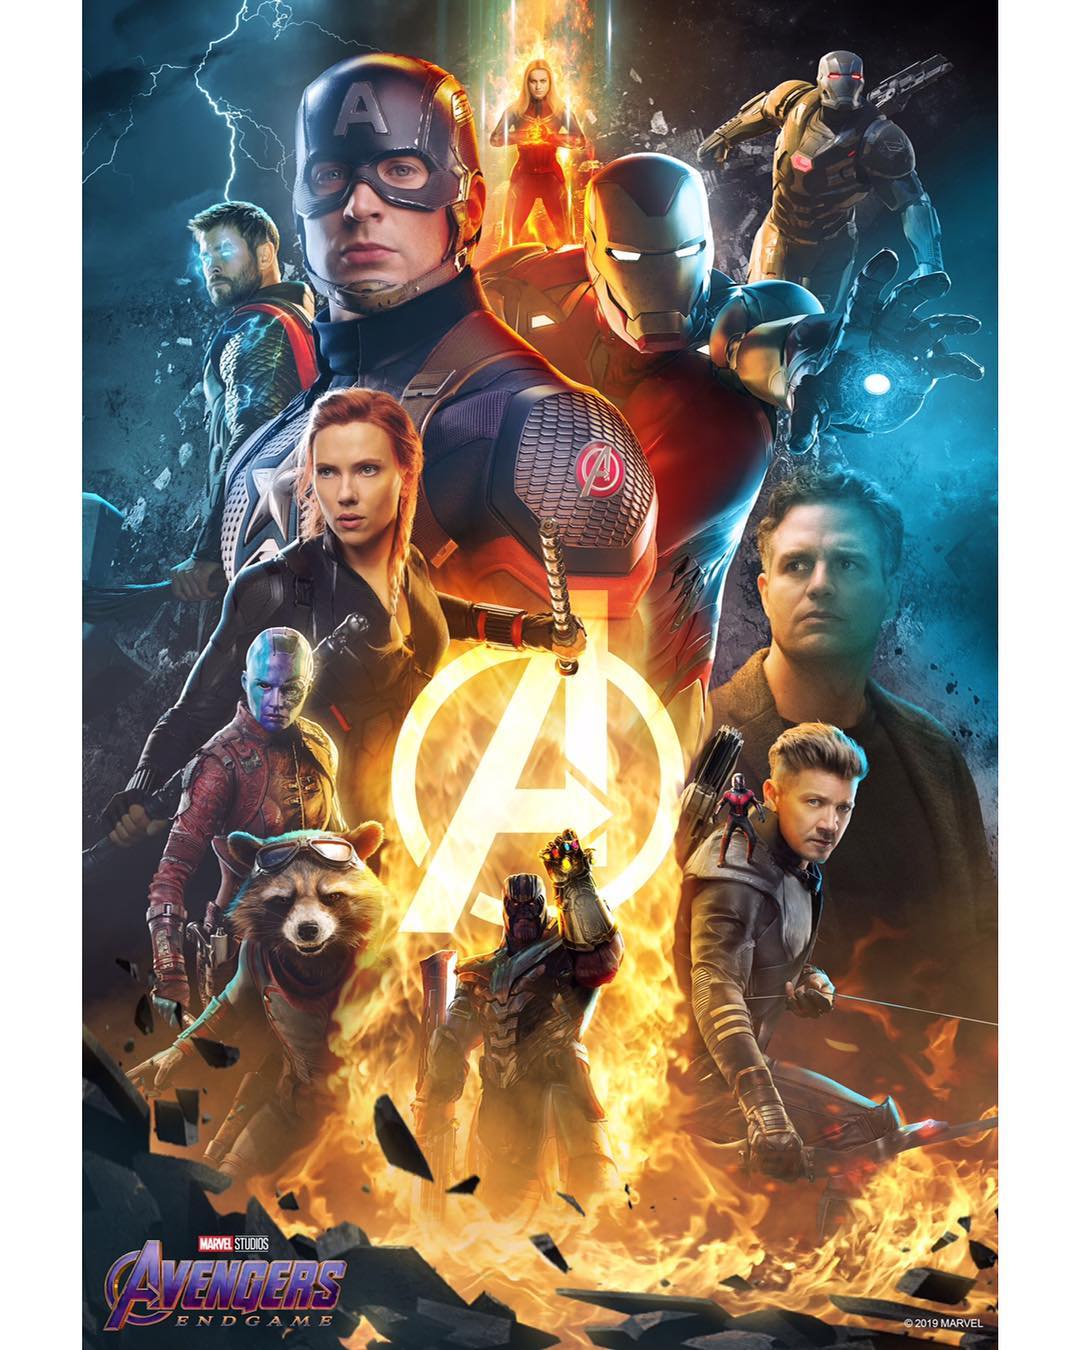 Avengers: End Game Would Run In The Theaters 24*7 All Over India